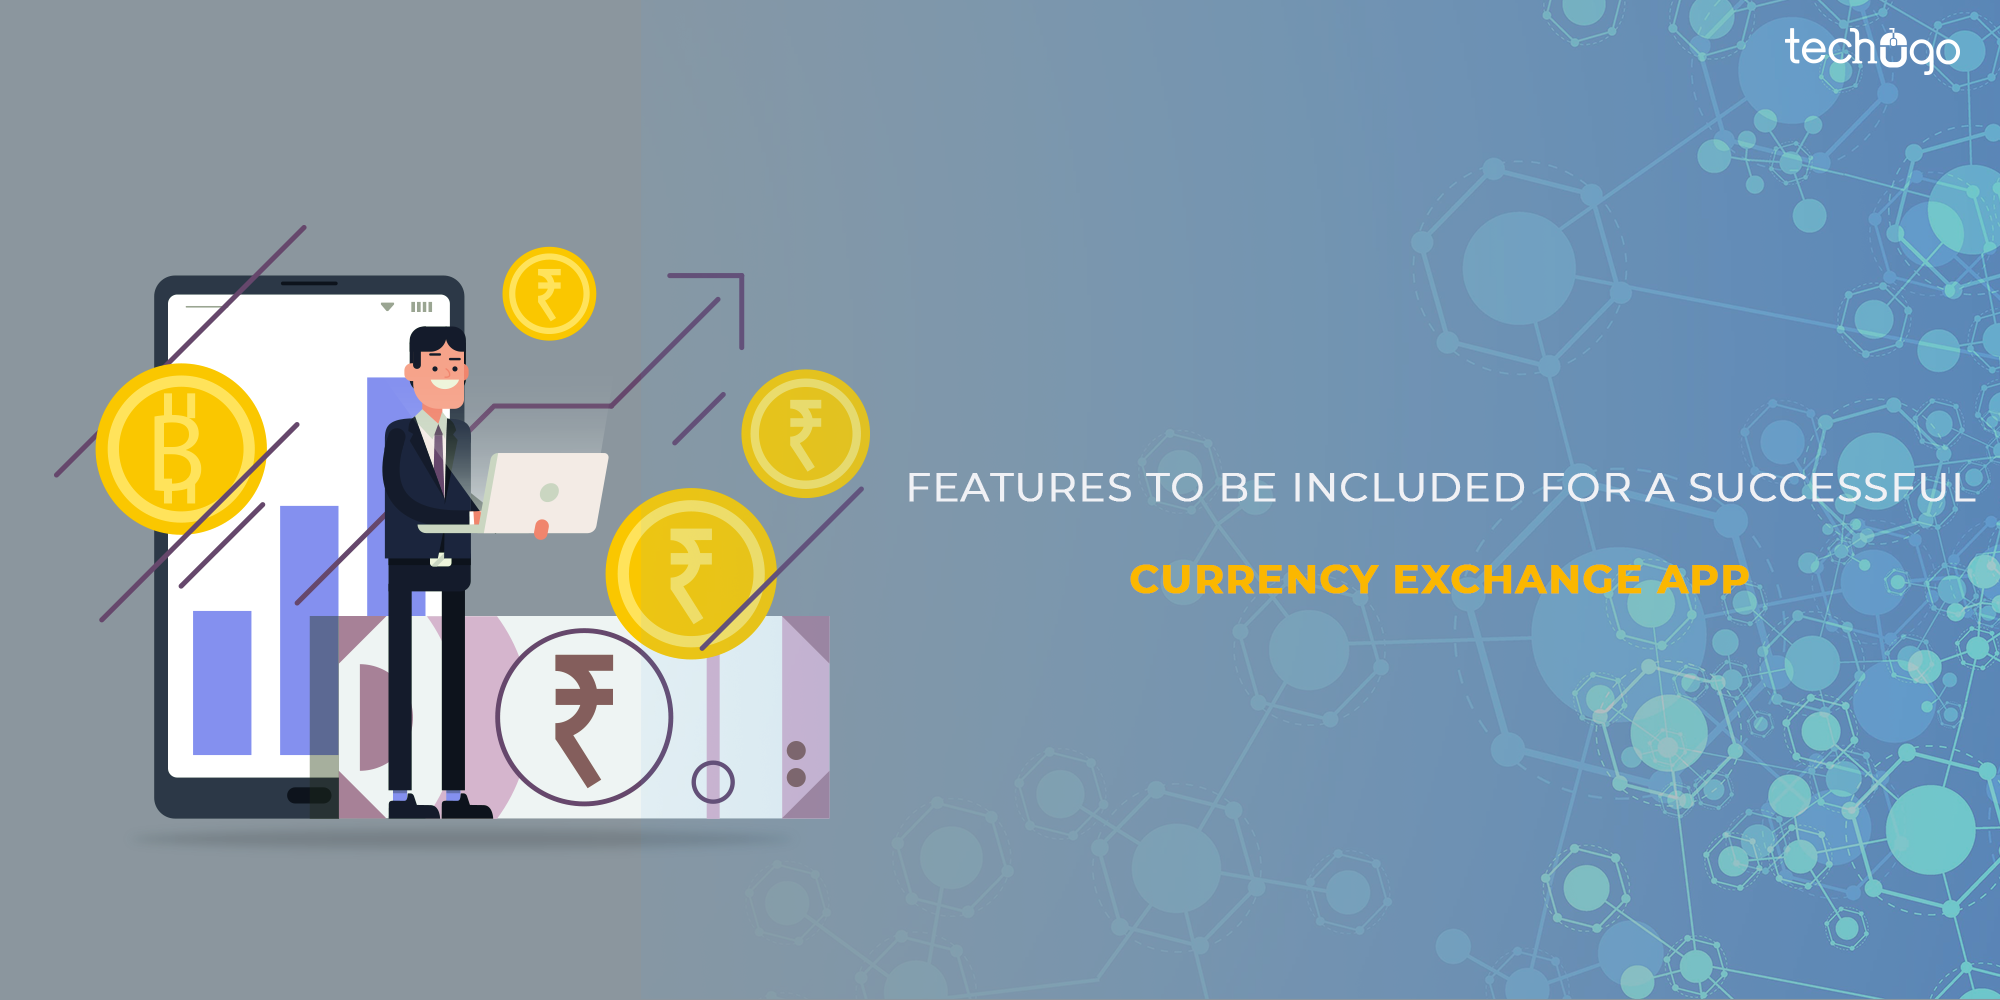 Features To Be Included For A Successful Currency Exchange App